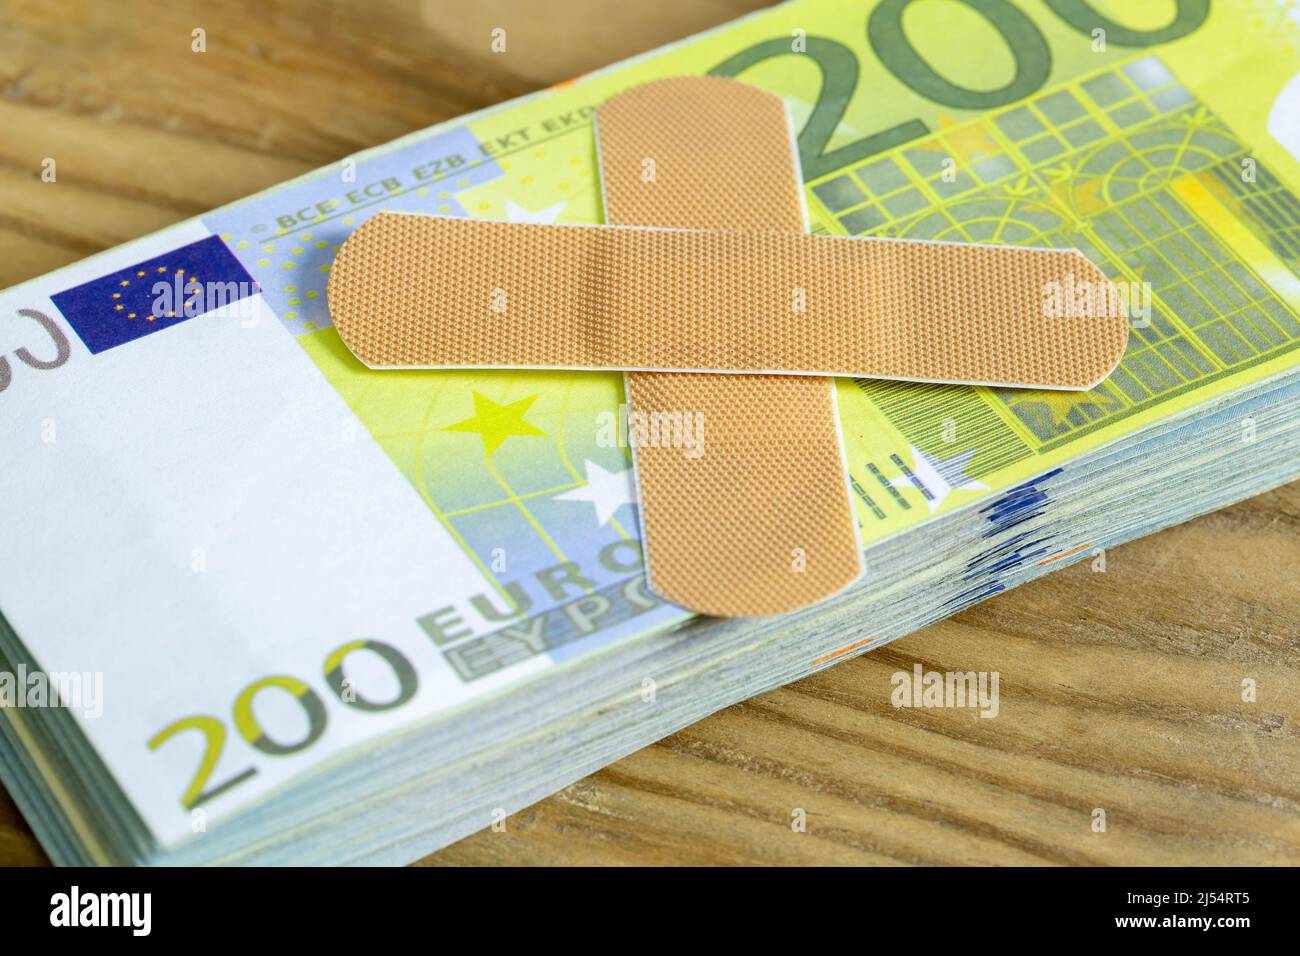 Financial Crises and Money Concept Stock Photo